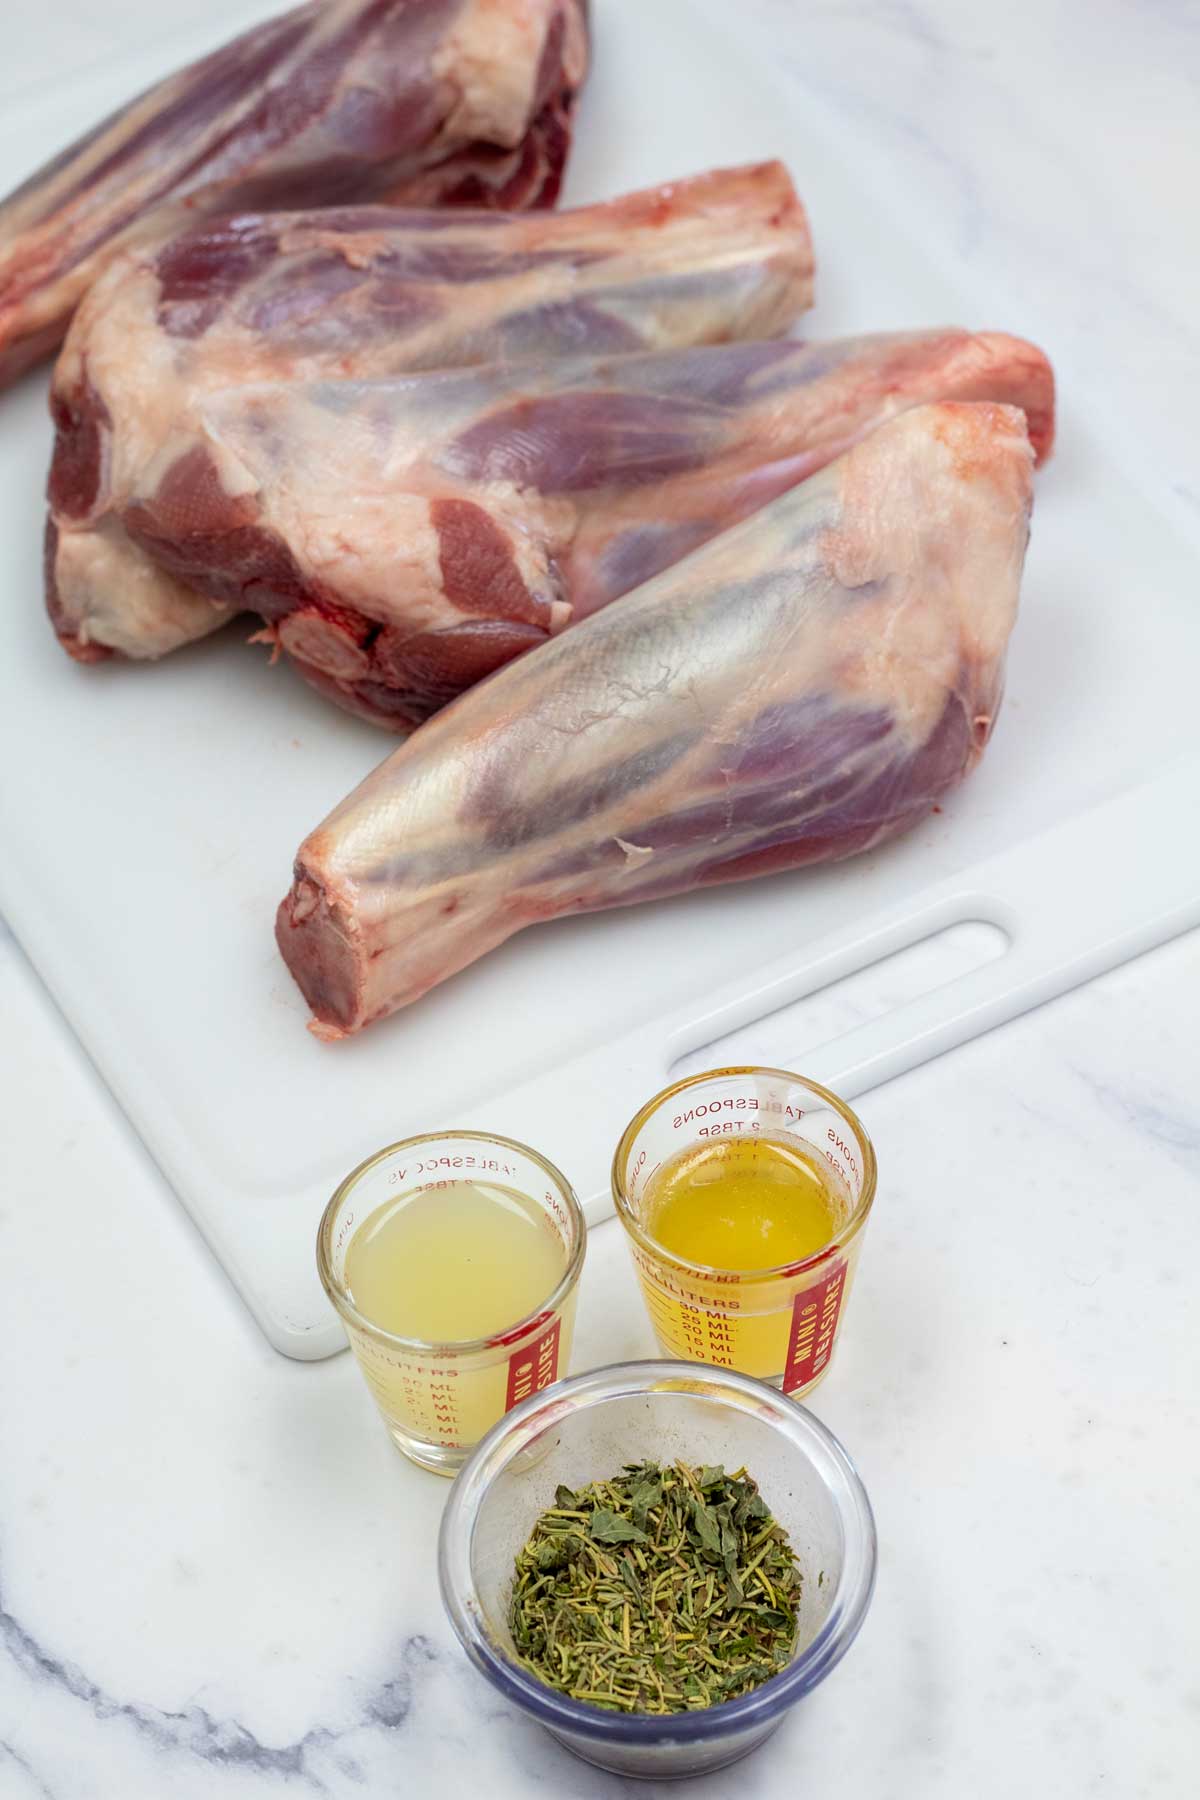 Tall image showing the ingredients needed for grilled lamb shanks.